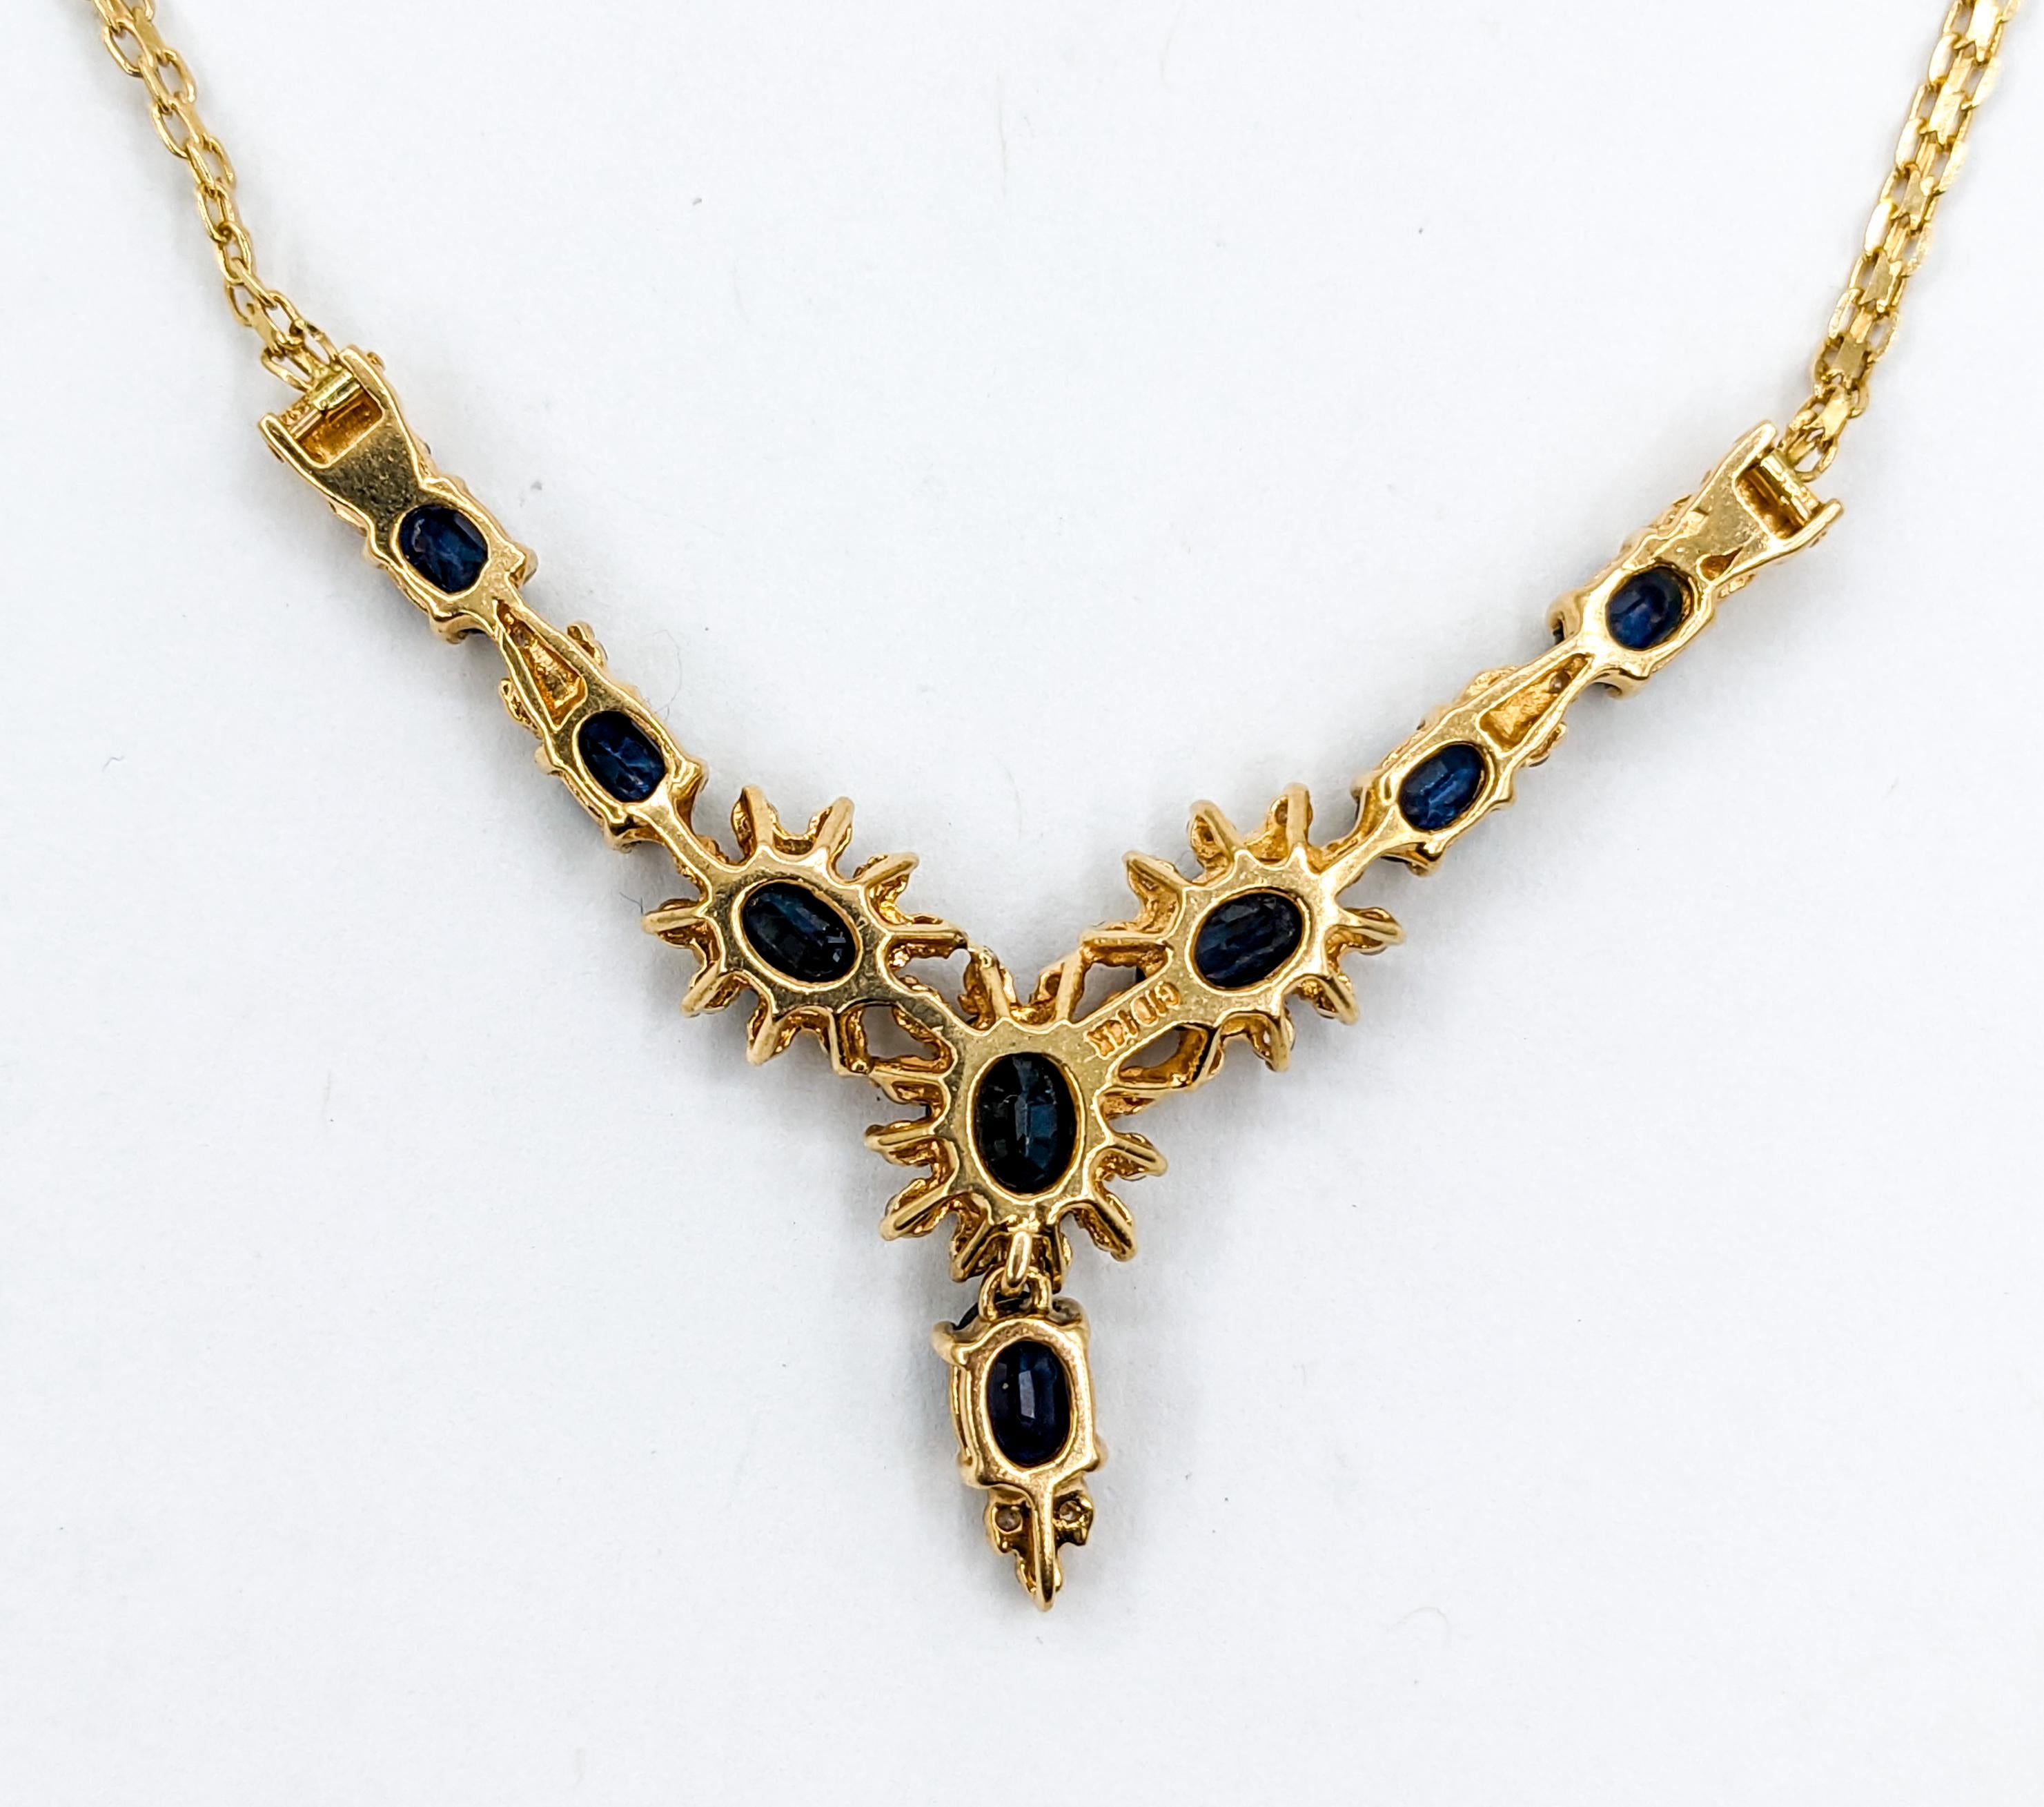 Sapphire & Diamond Halo Necklace in Yellow Gold

This stunning Sapphire necklace is meticulously crafted from 14-karat yellow gold. The three center sapphires feature glittering diamond halos, the diamonds total 0.33ctw. The diamonds, with their